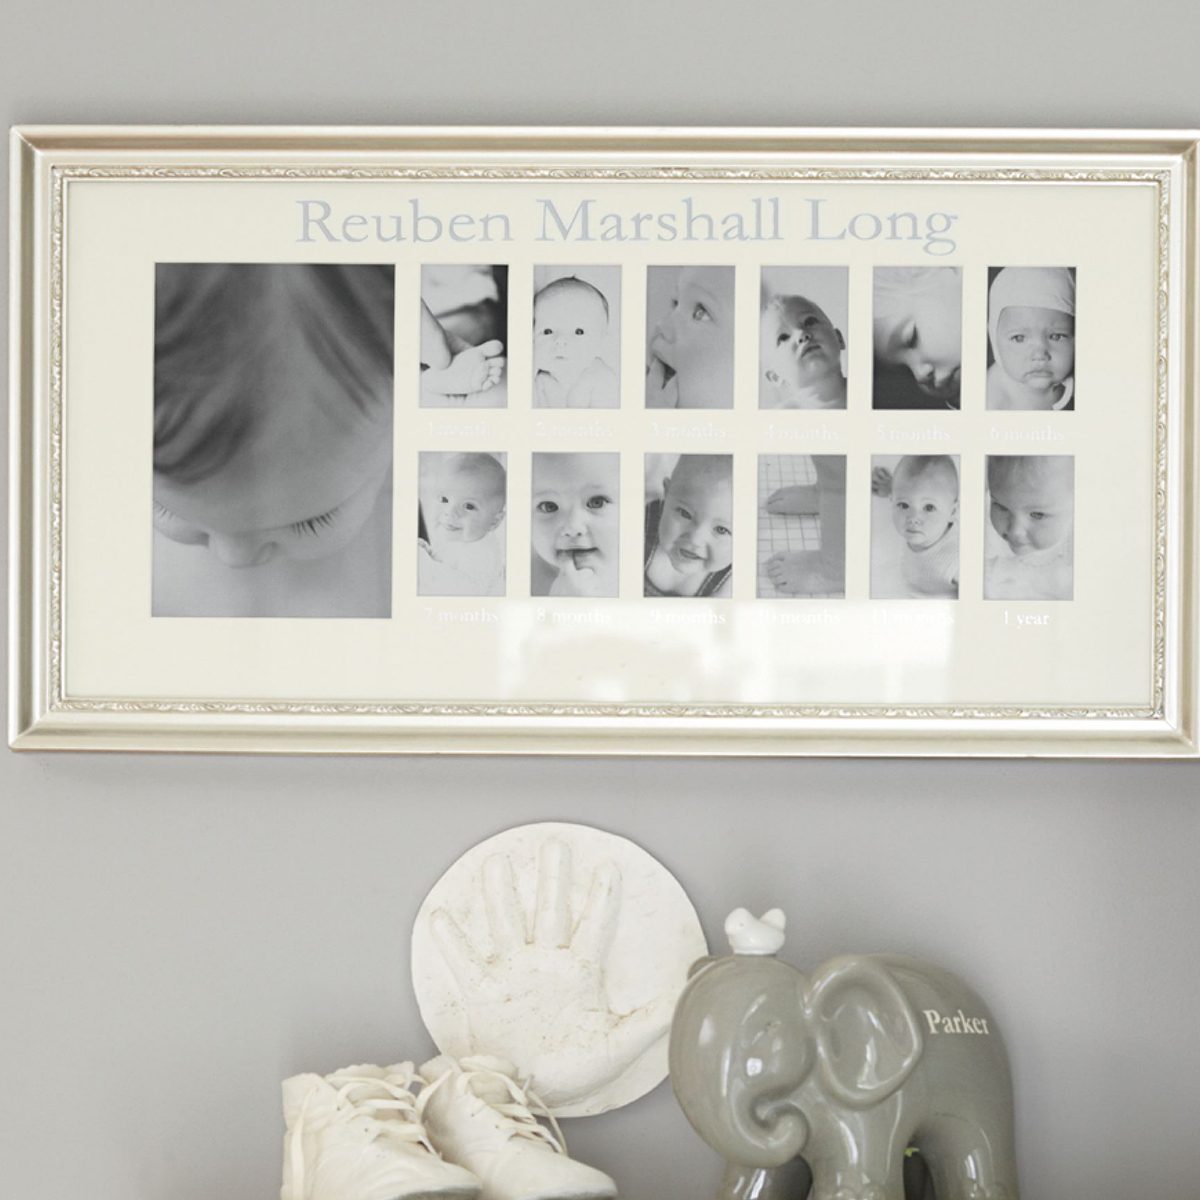 <p>This beautiful <a href="https://www.potterybarnkids.com/products/silver-leaf-first-year-frame/" rel="noopener noreferrer">frame</a> gives excited new parents a spot to put all of those monthly <a href="https://www.rd.com/list/10-funny-babies-making-faces/">baby photos</a> they diligently take. It features solid wood and a finish with silver leaf and measures 22 inches wide and 11.5 inches high. The mat, which has the option to personalize it with the baby's name, has a spot for 12 2-inch by 3-inch photos as well as one 5-inch by 7-inch photo of their new bundle of joy.</p> <p class="listicle-page__cta-button-shop"><a class="shop-btn" href="https://www.potterybarnkids.com/products/silver-leaf-first-year-frame/">Shop Now</a></p>